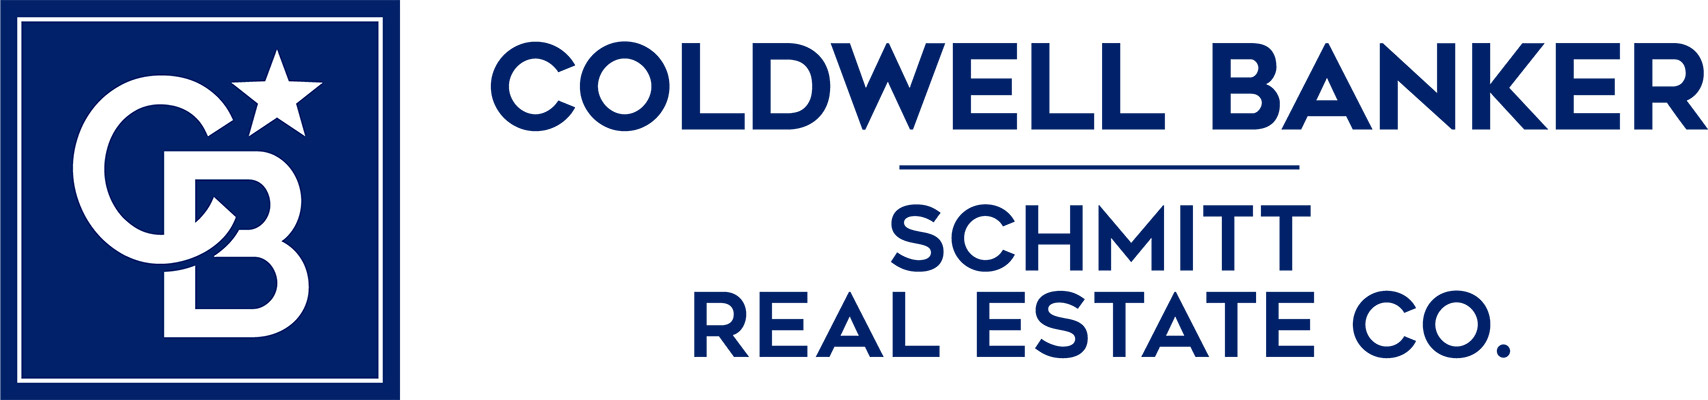 Shannon Musmanno - Coldwell Banker Logo